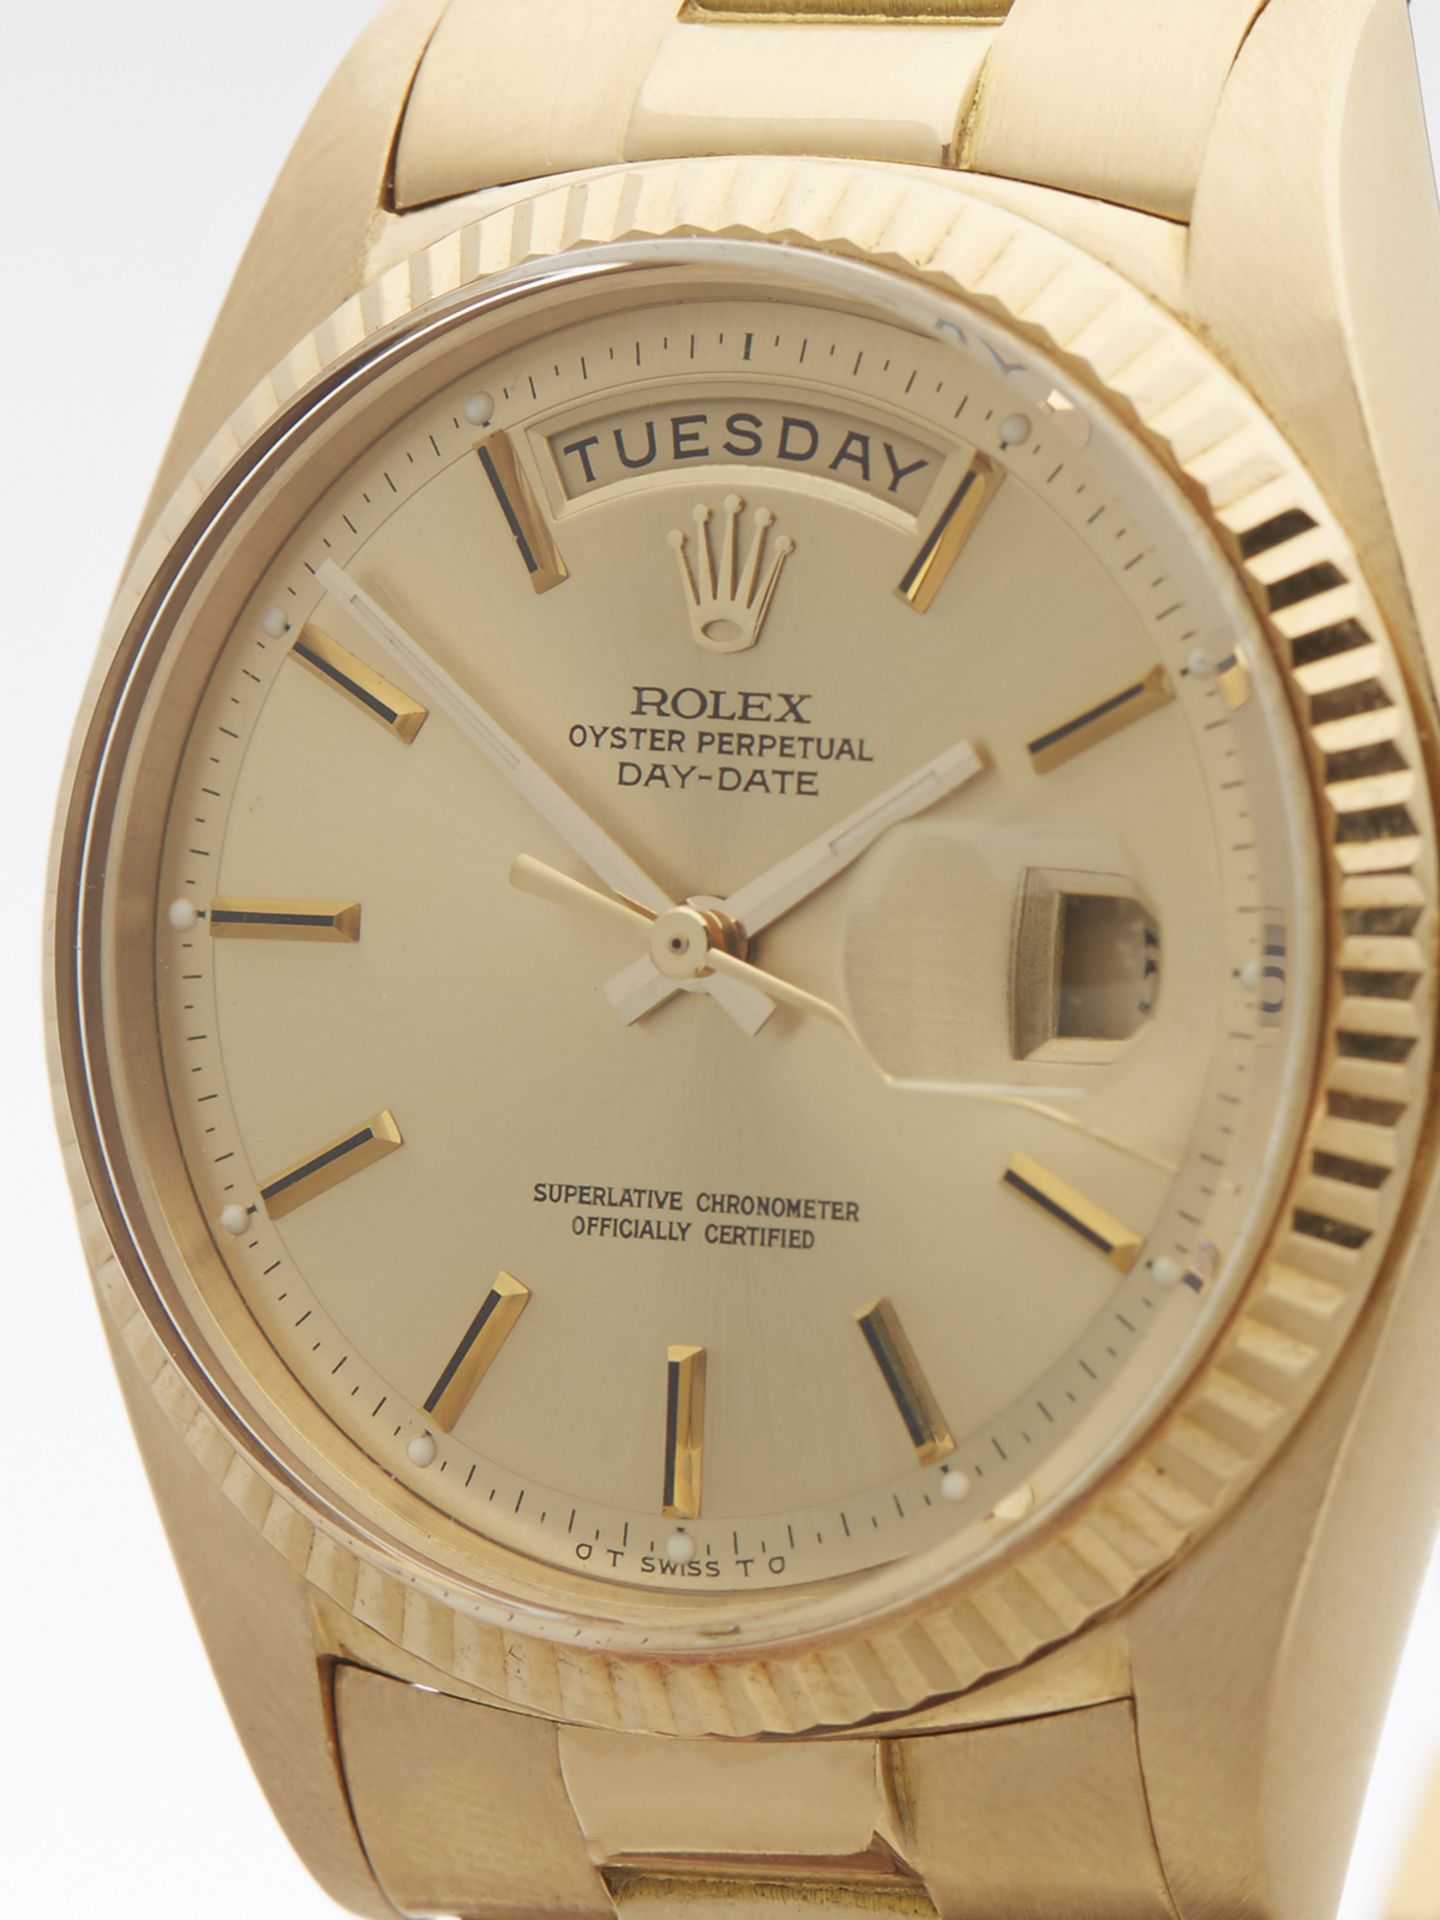 Rolex, Day-Date - Image 4 of 10